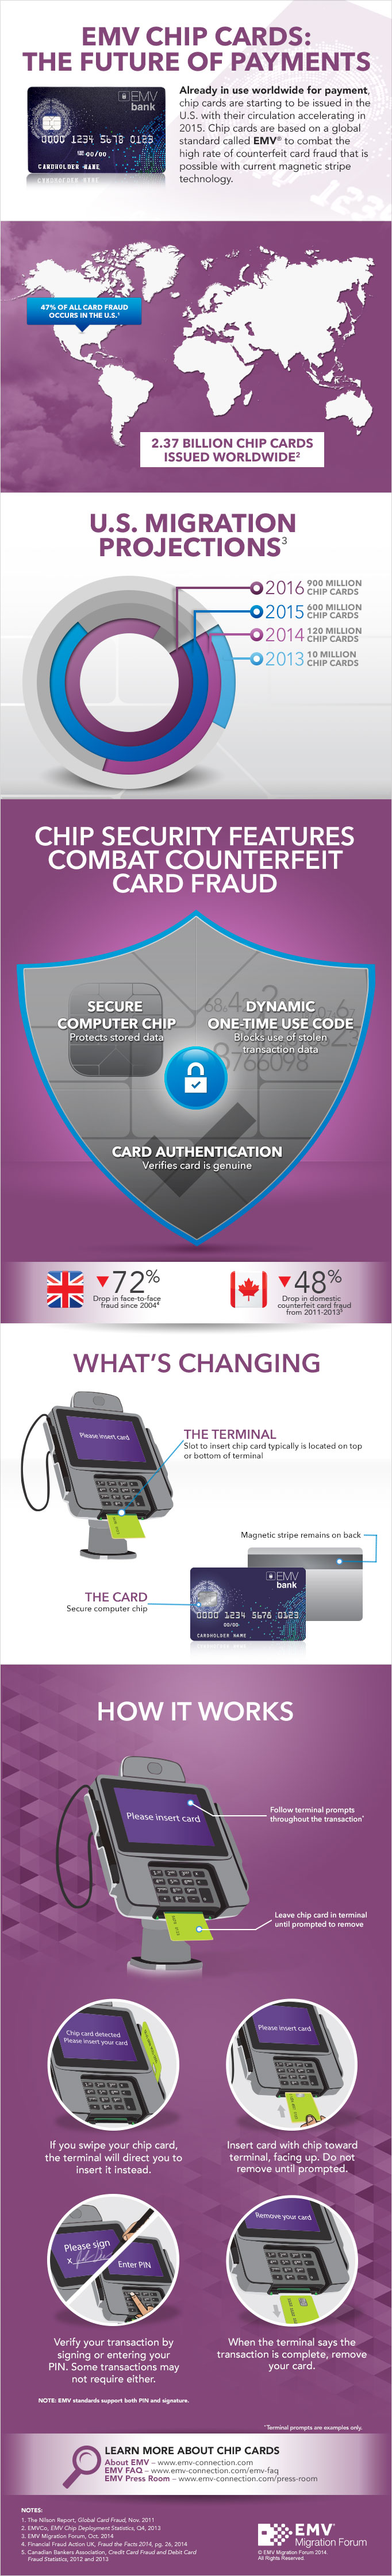 http://www.emv-connection.com/wp-content/uploads/2014/12/Infographic%E2%80%93EMV-Chip-Cards-The-Future-of-Payments.jpg